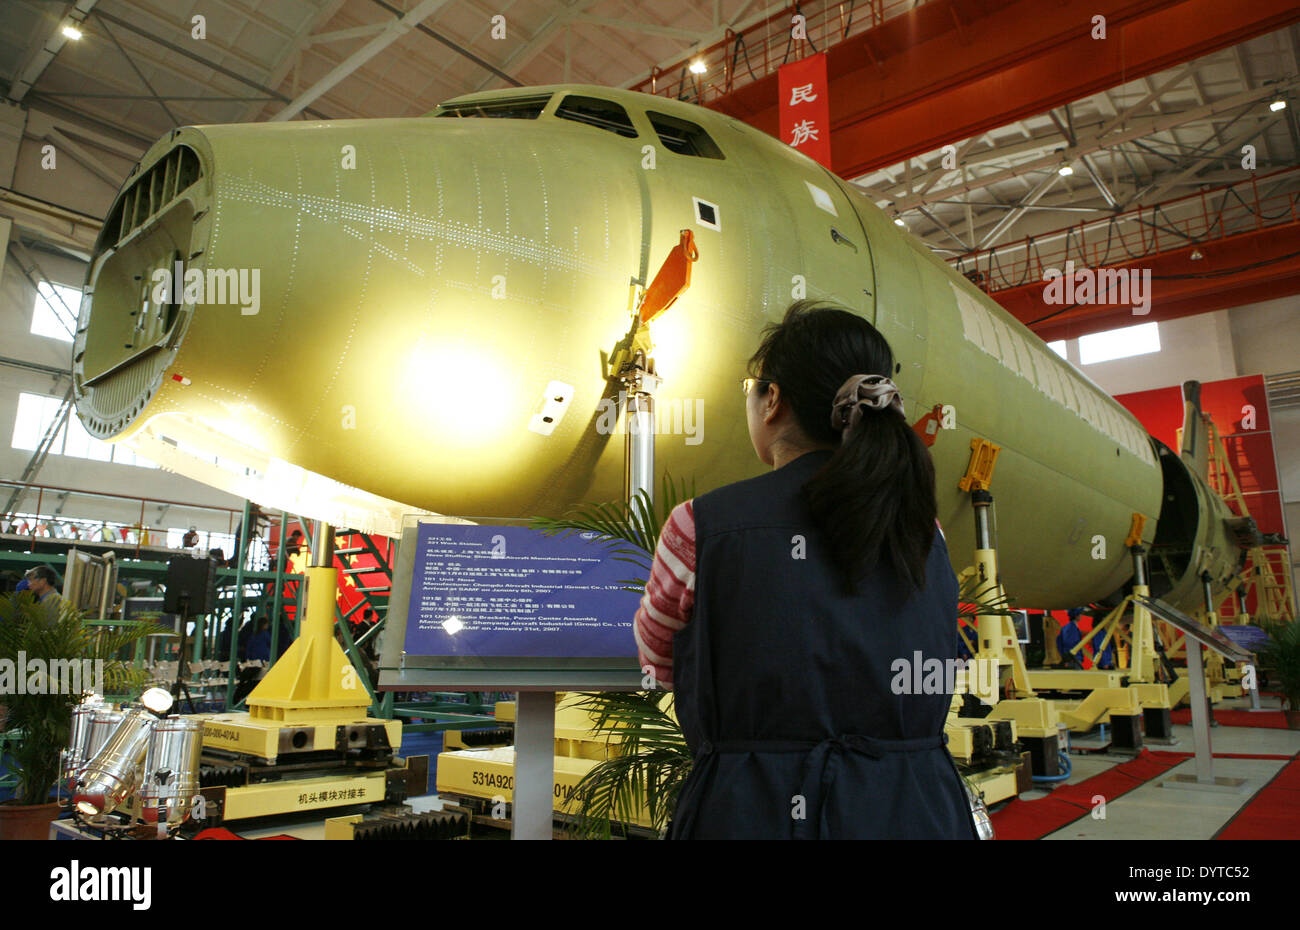 A Chinese woman looks at a ARJ-21 jet at Shanghai Aircraft Manufacturing Facilityassembly facility in Shanghai Stock Photo